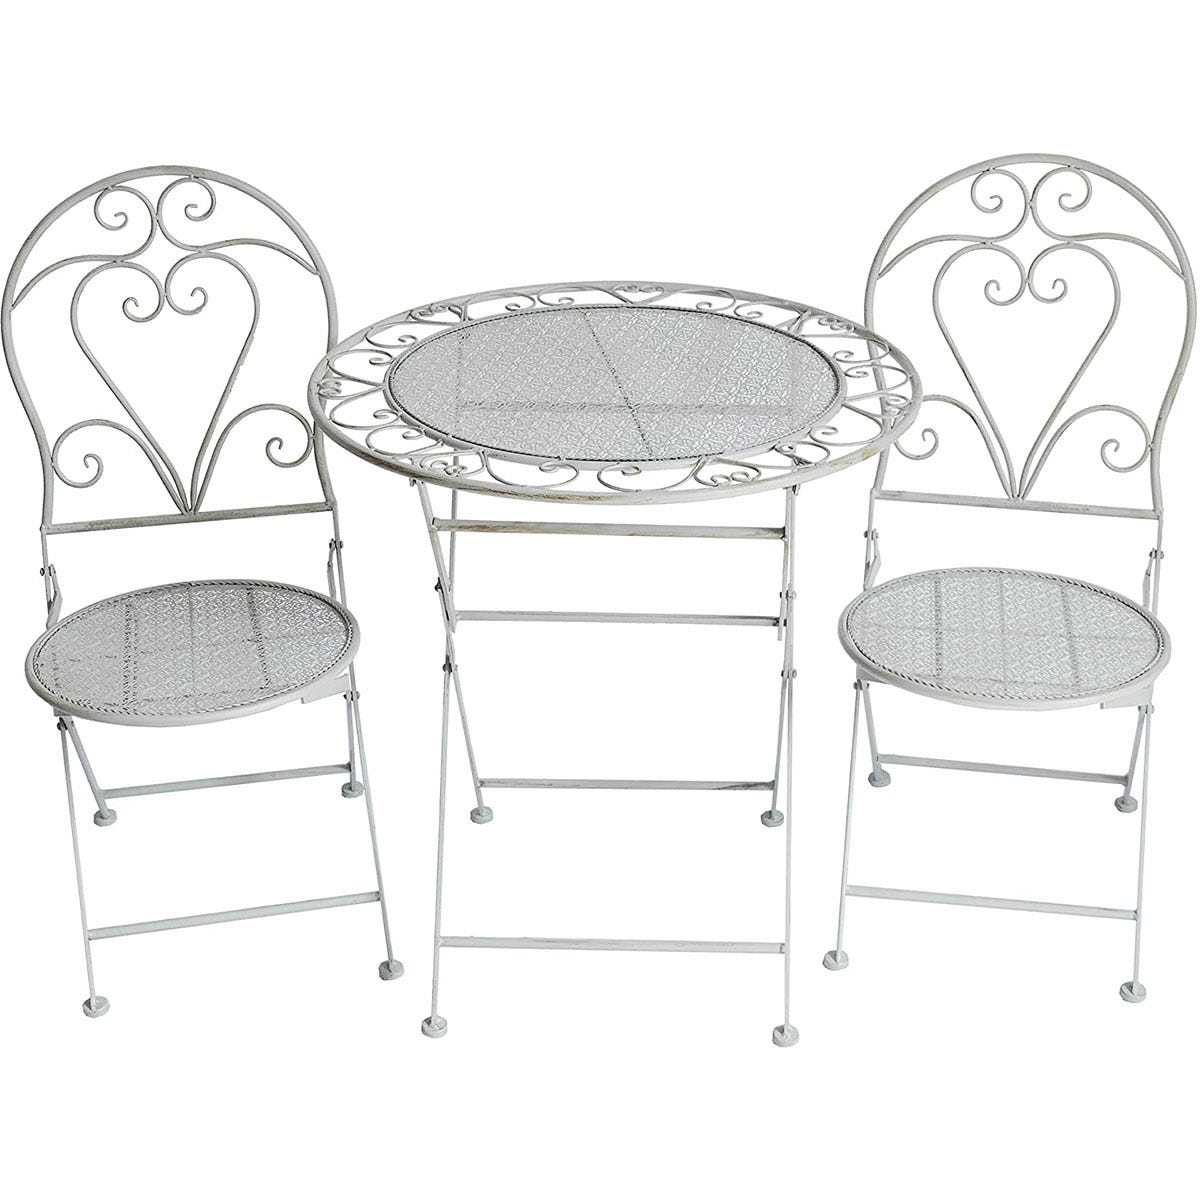 Glamhaus Foldable 3 Piece Metal Garden Furniture Set Table And Two Chairs - Grey